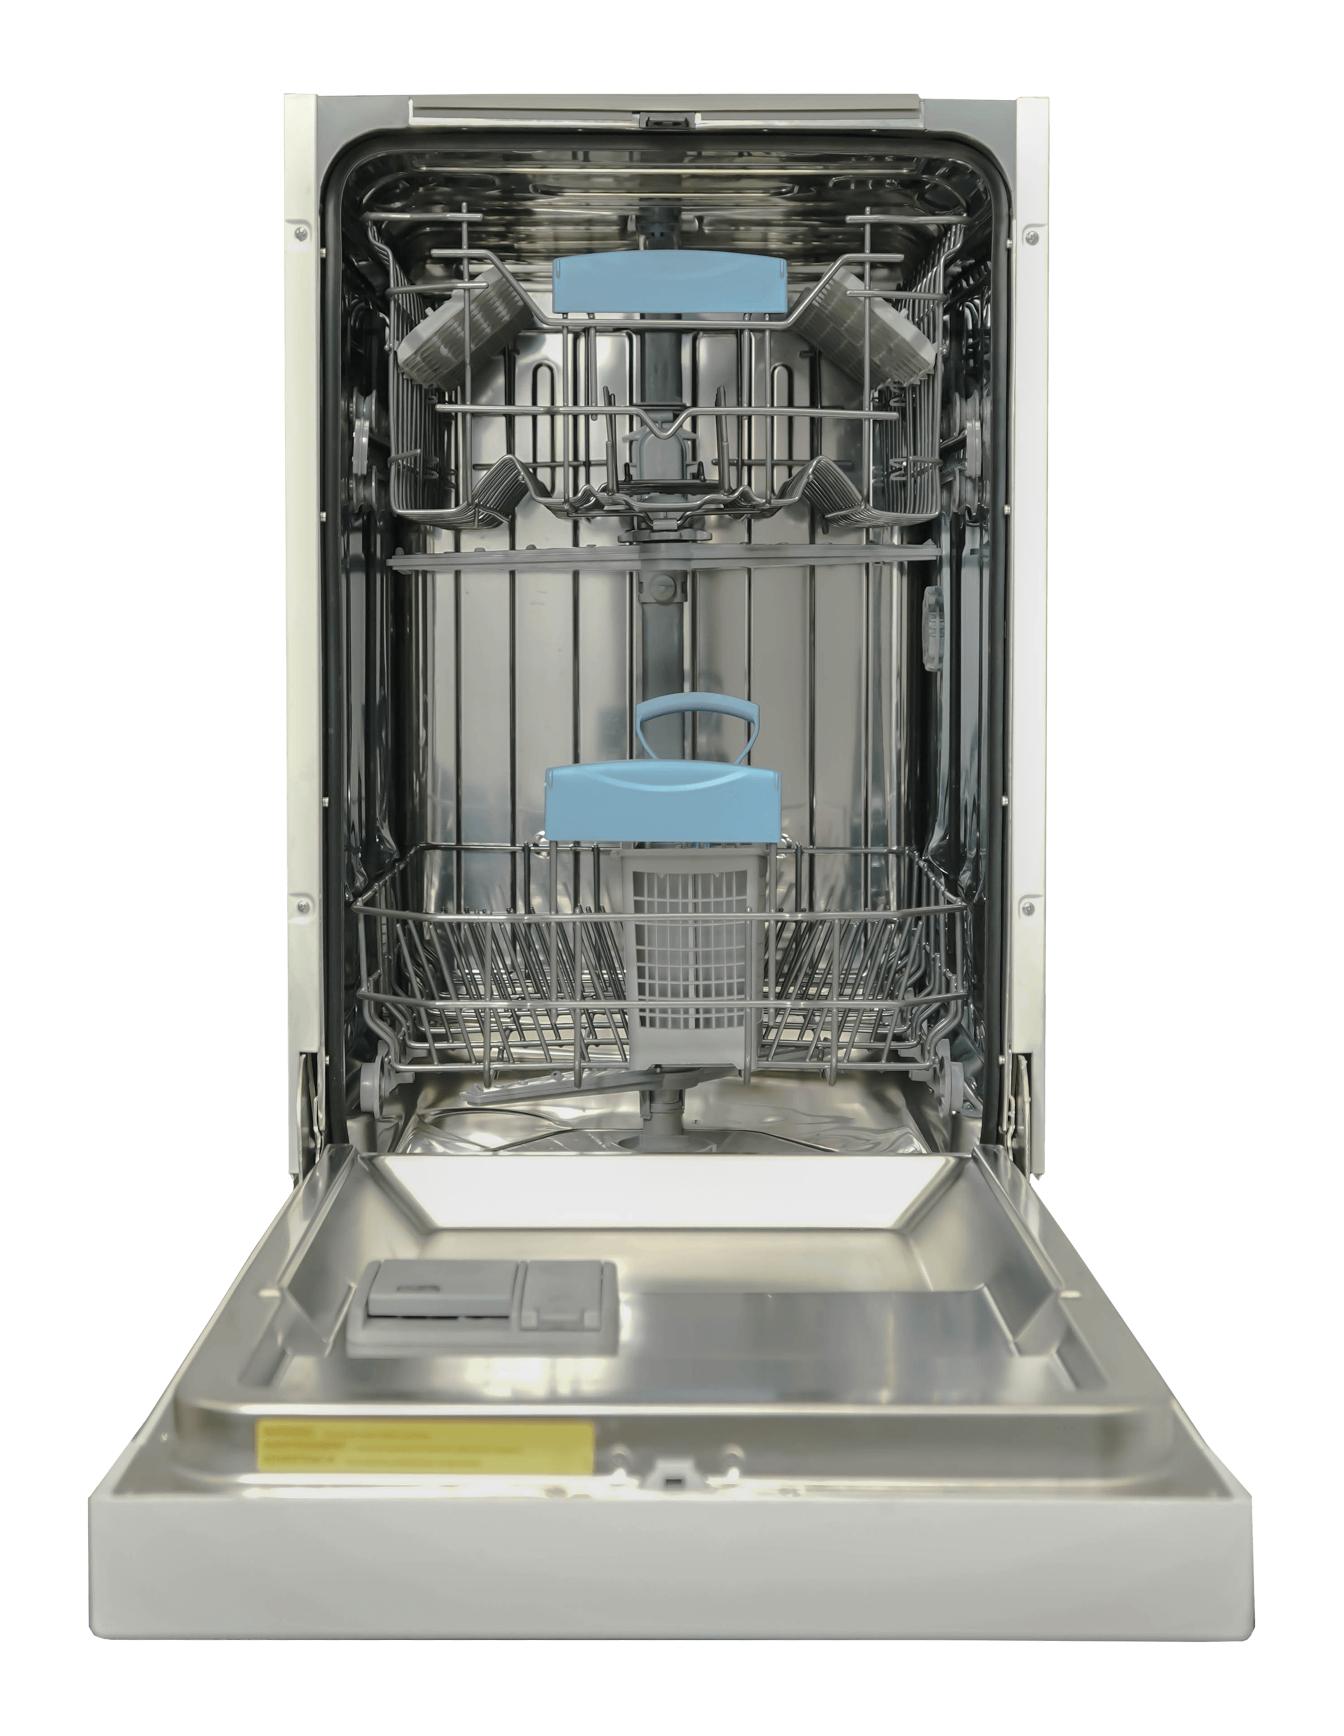 Danby 18" Wide Built-in Dishwasher in White